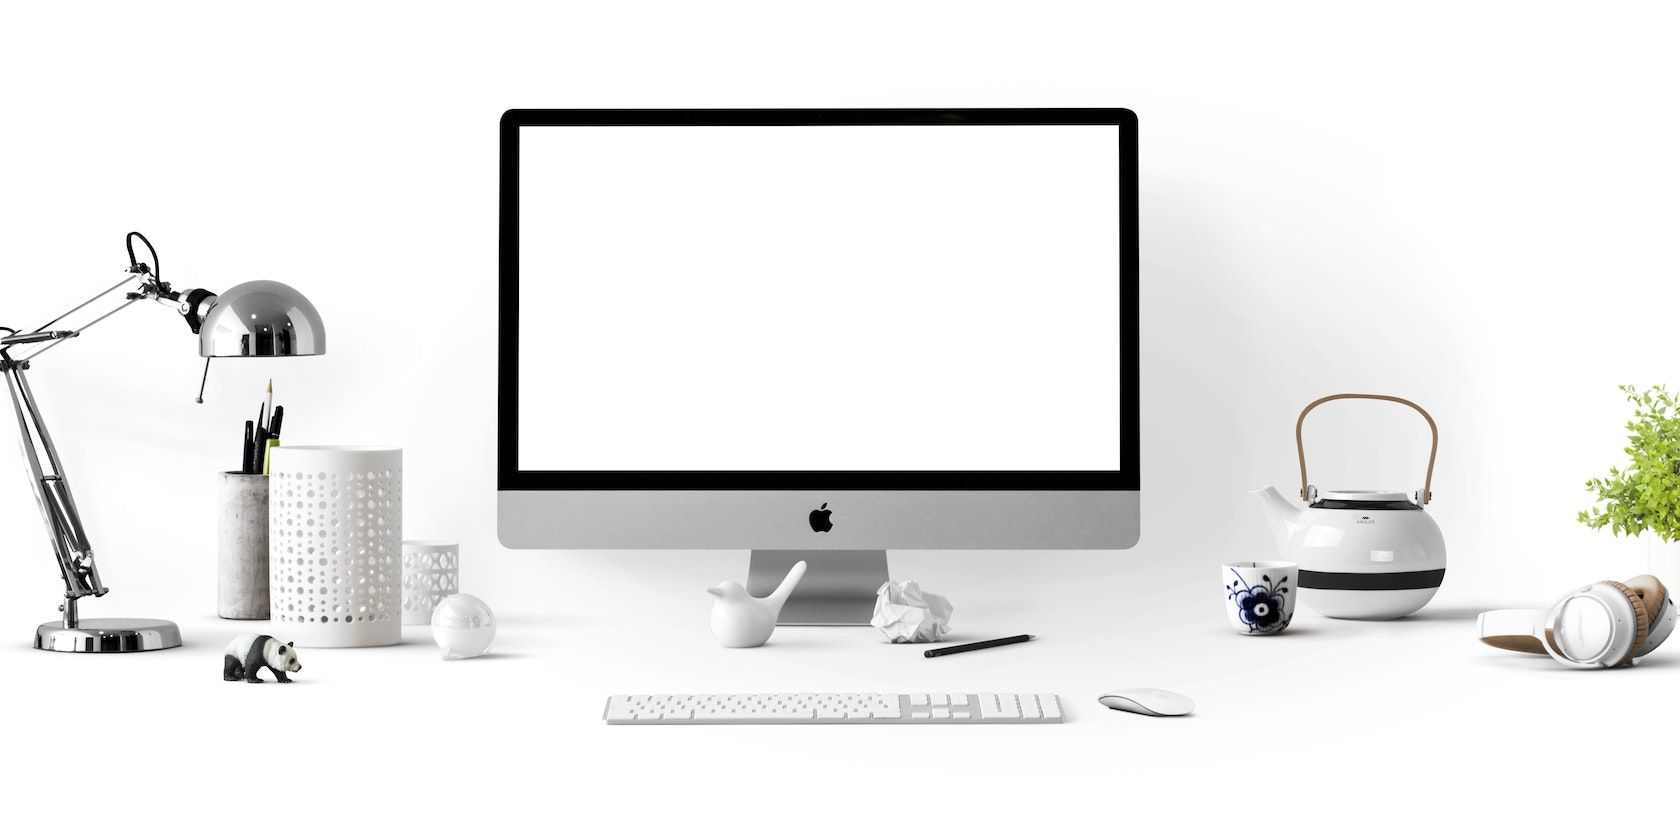 A silver iMac surrounded by a ceramic kettle and a collection of work gadgets